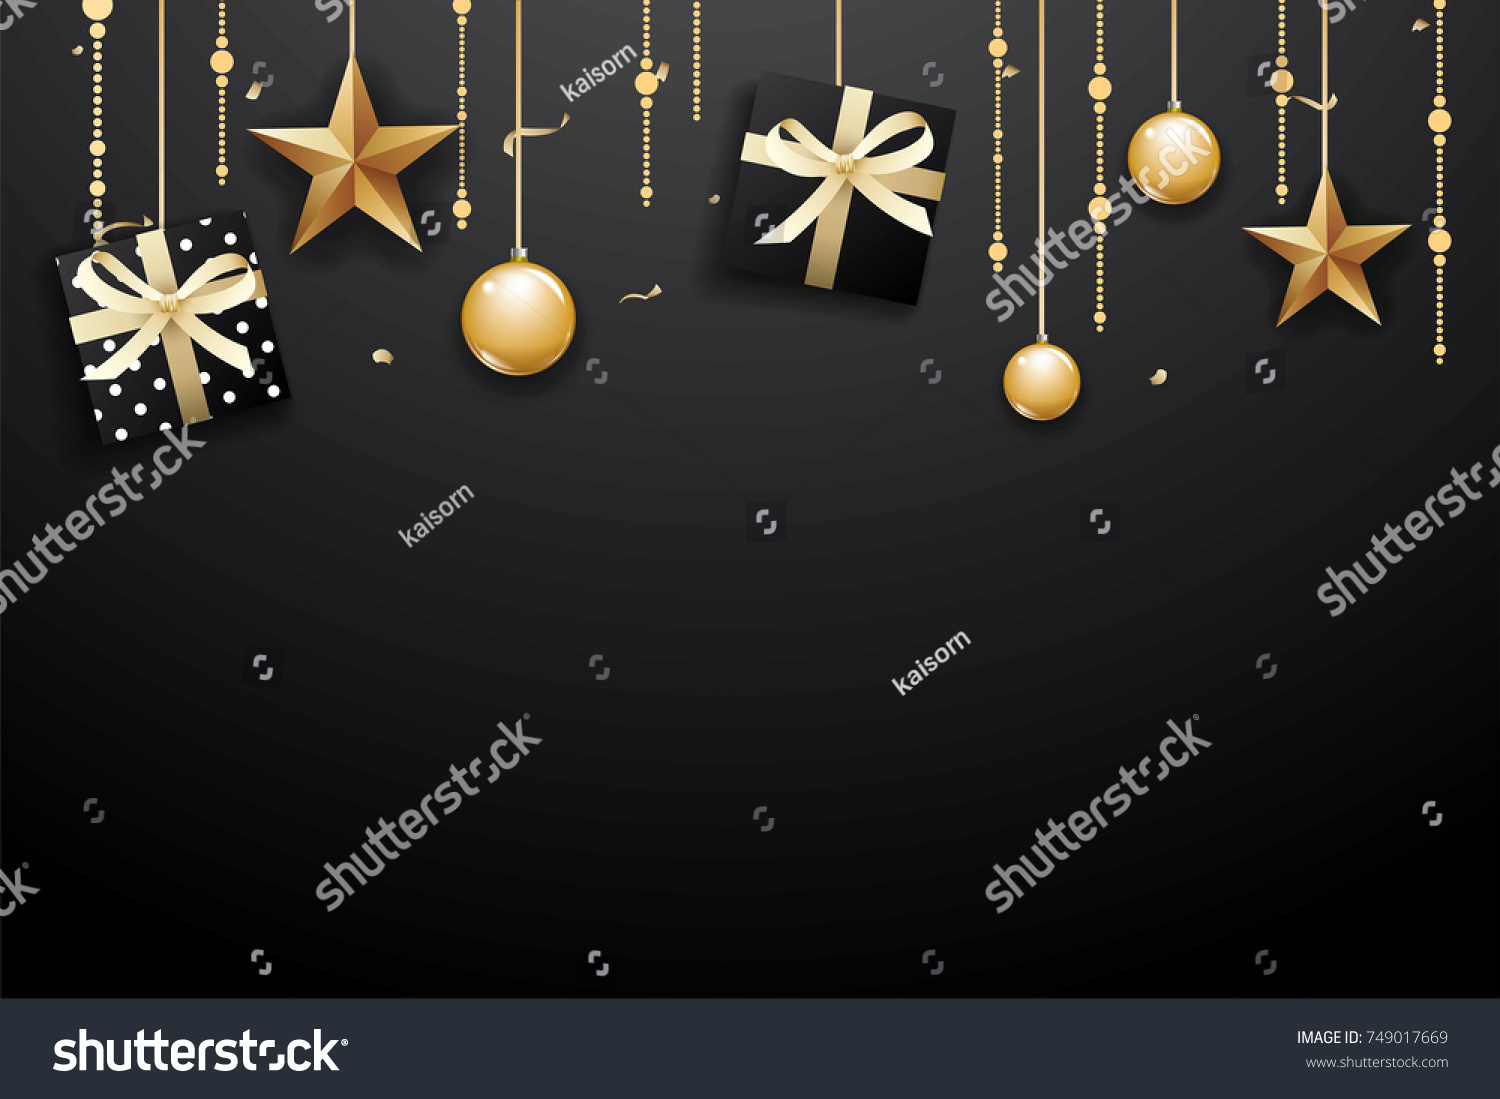 Merry christmas and happy new year on dark background with luxury gold ball, gift box, and star. #749017669